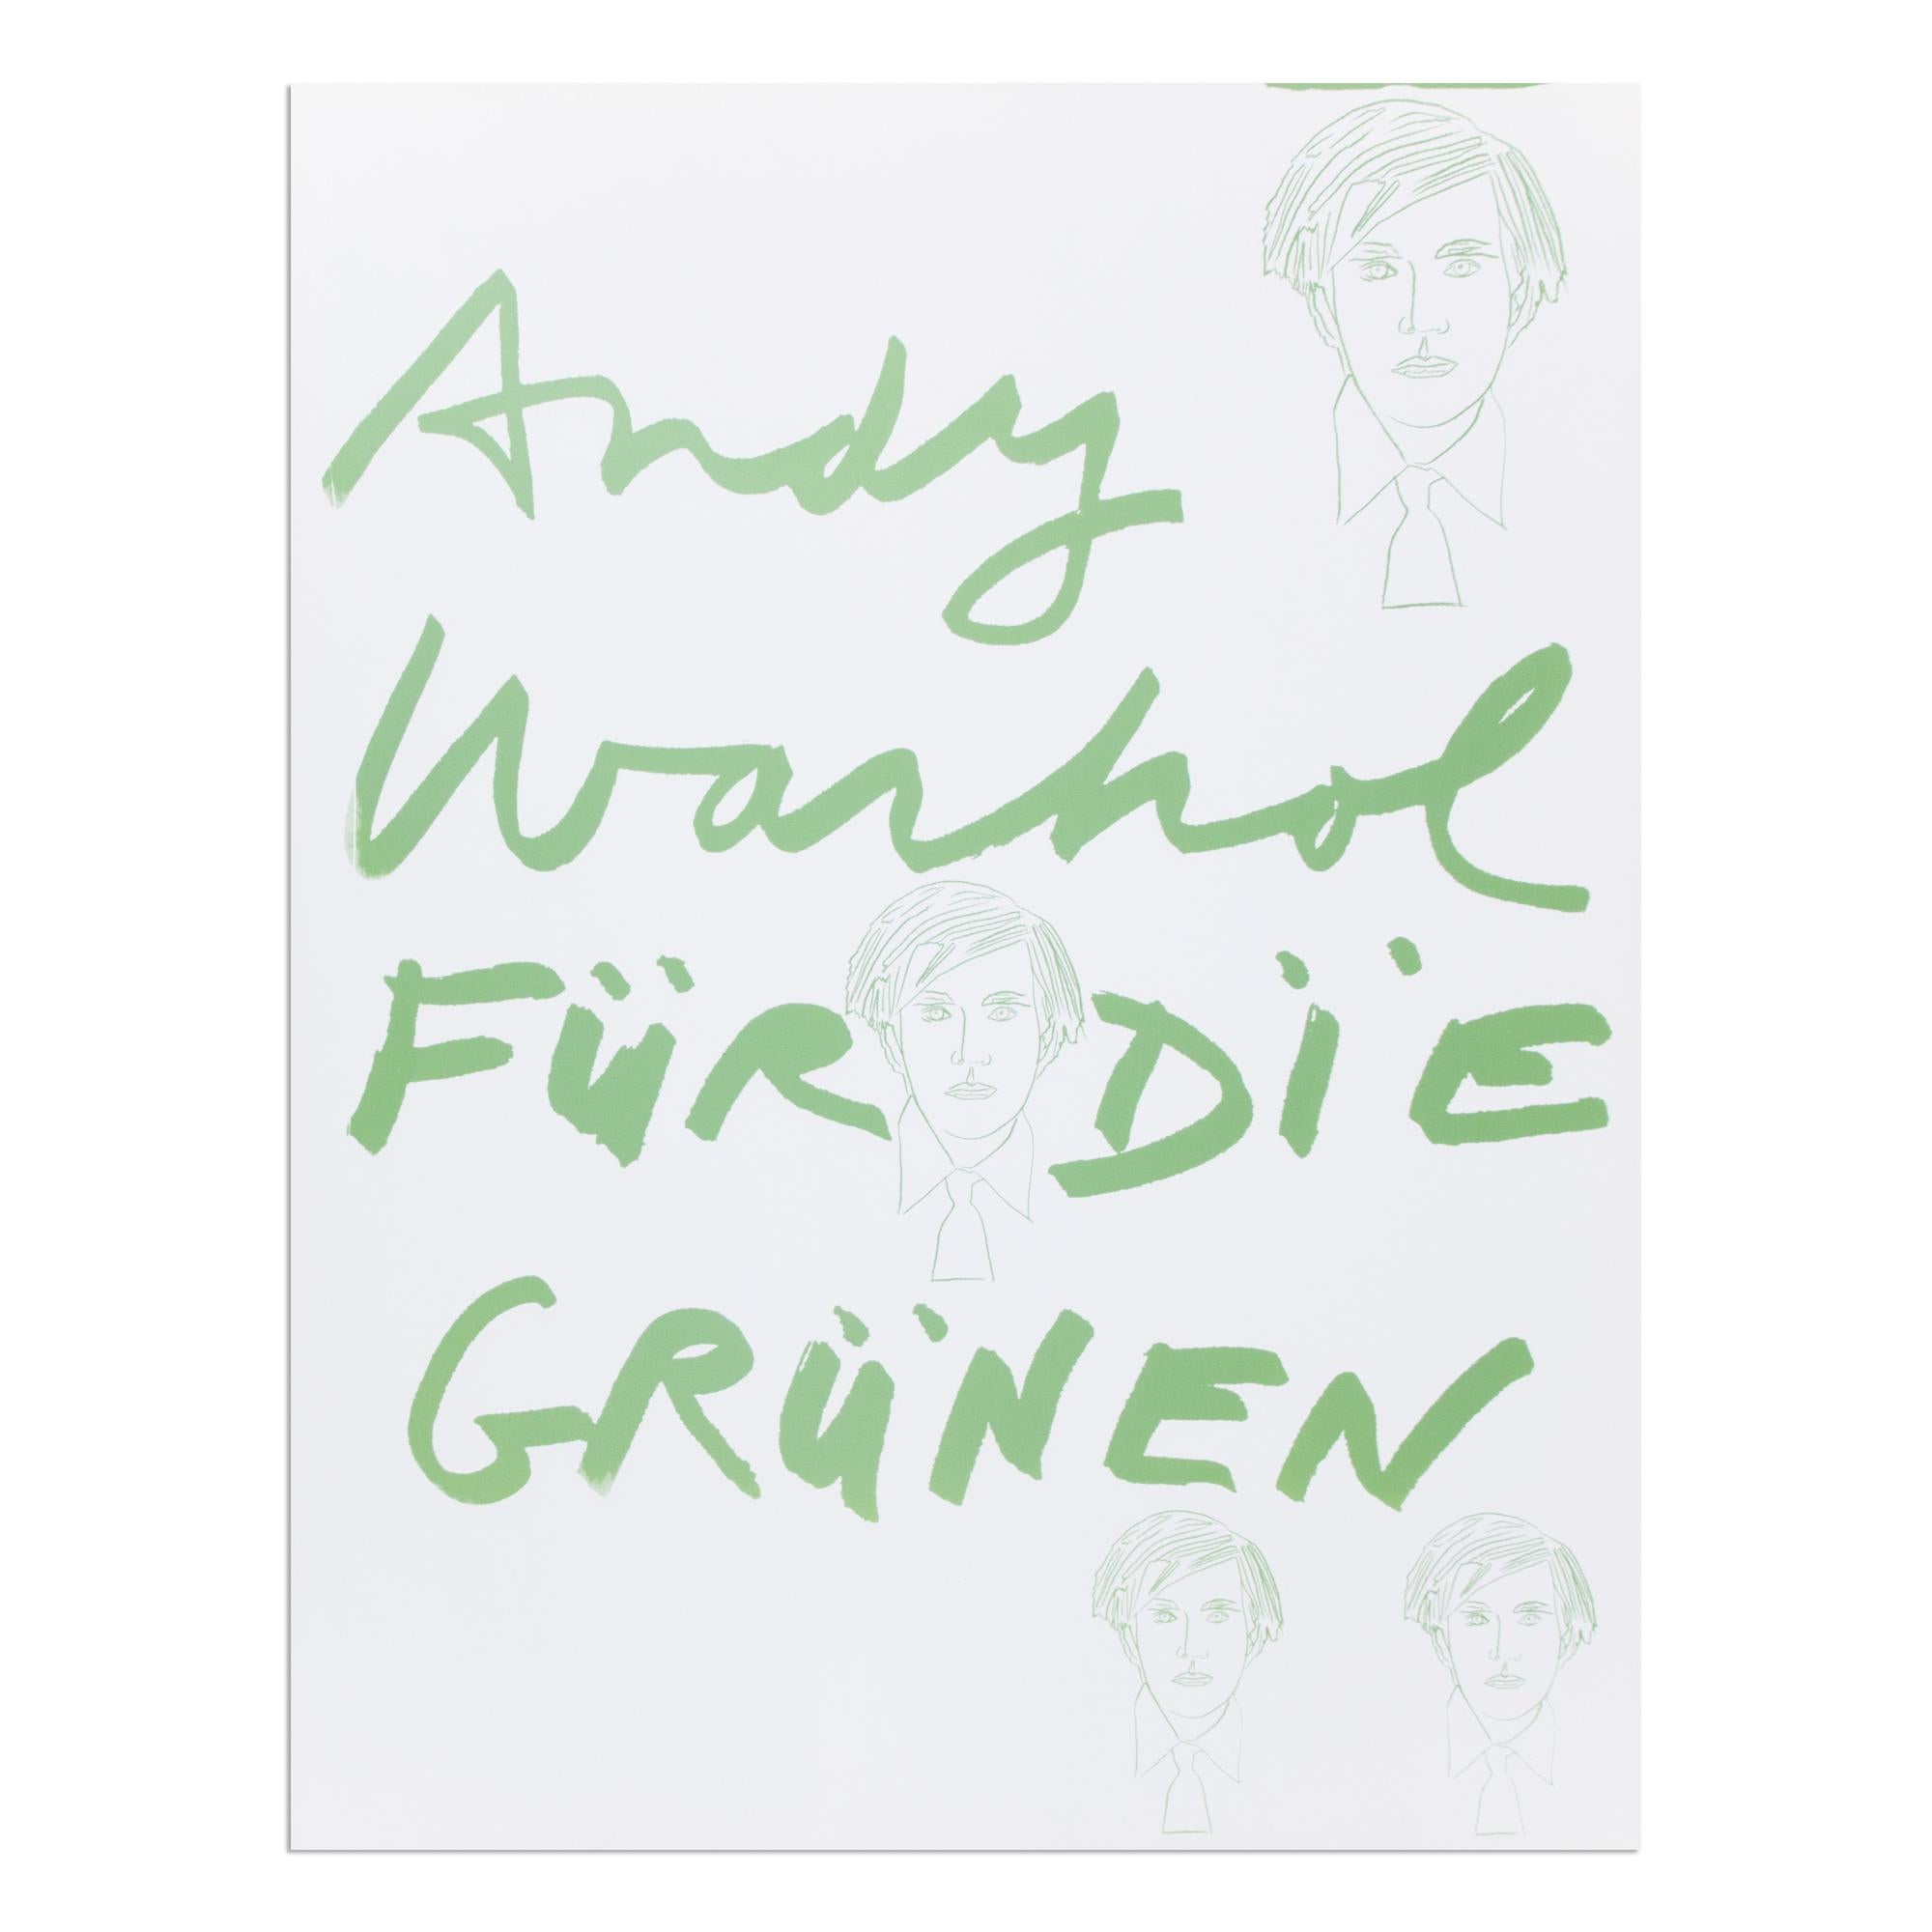 Andy Warhol (1928-1987)
Andy Warhol für die Grünen, 1980
Medium: Screenprint on paper (election poster)
Dimensions: 101 x 77 cm
Edition size unknown: Not signed, not numbered
Publisher: F.I.U. Free International University, Düsseldorf (founded by